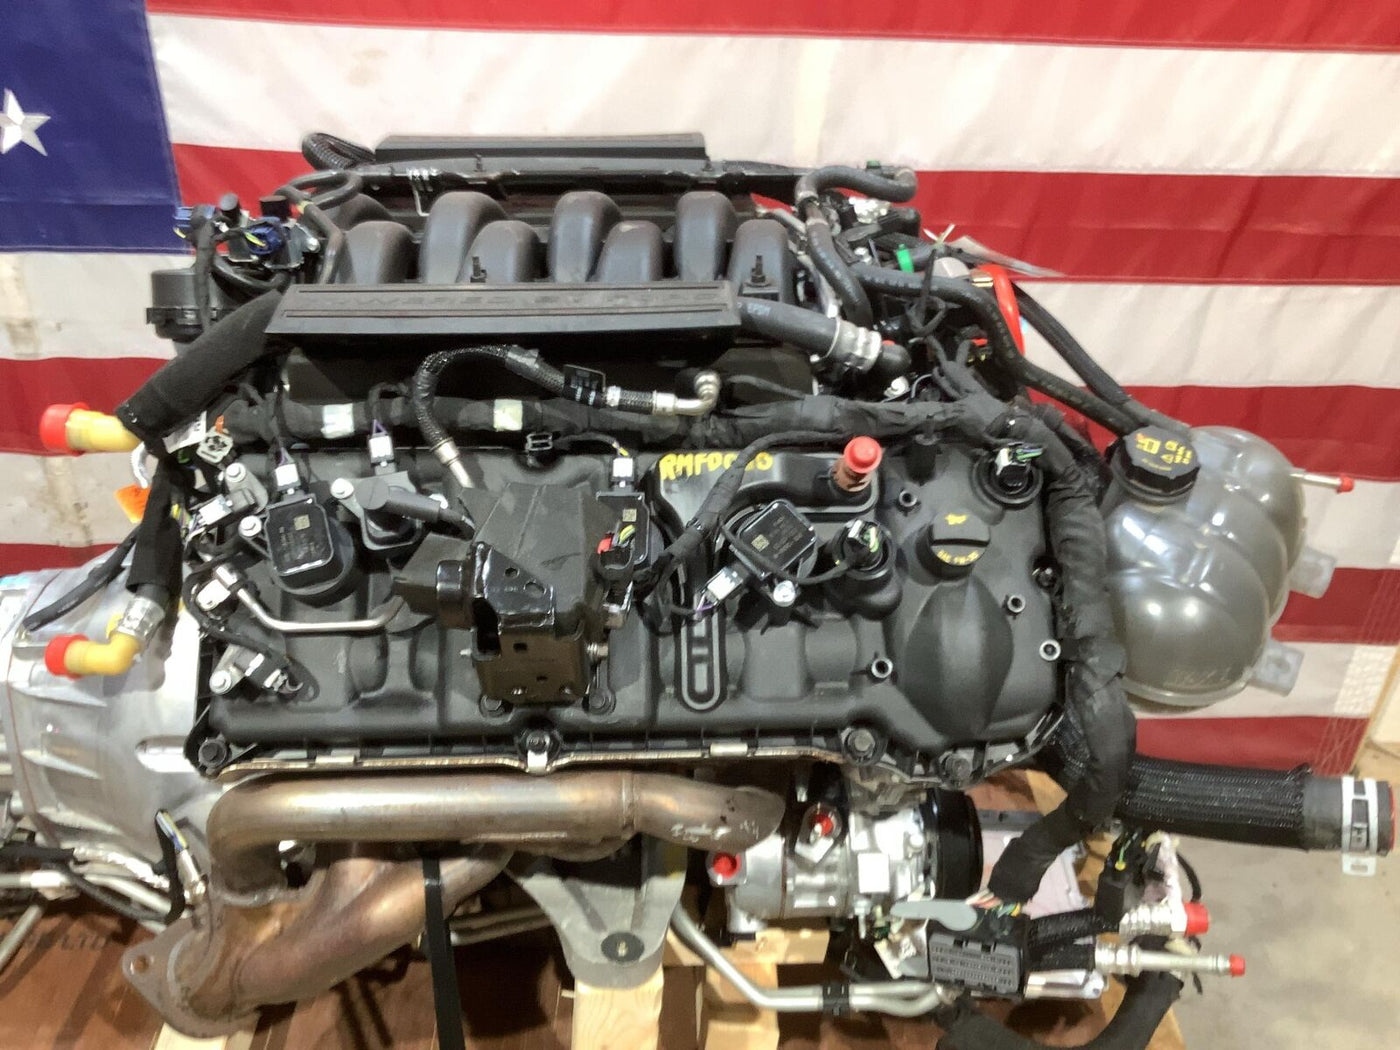 19-22 Mustang MACH 1 5.0L Coyote Engine W/ TR-3160 Trans Dropout Hot Rod Swap 4K